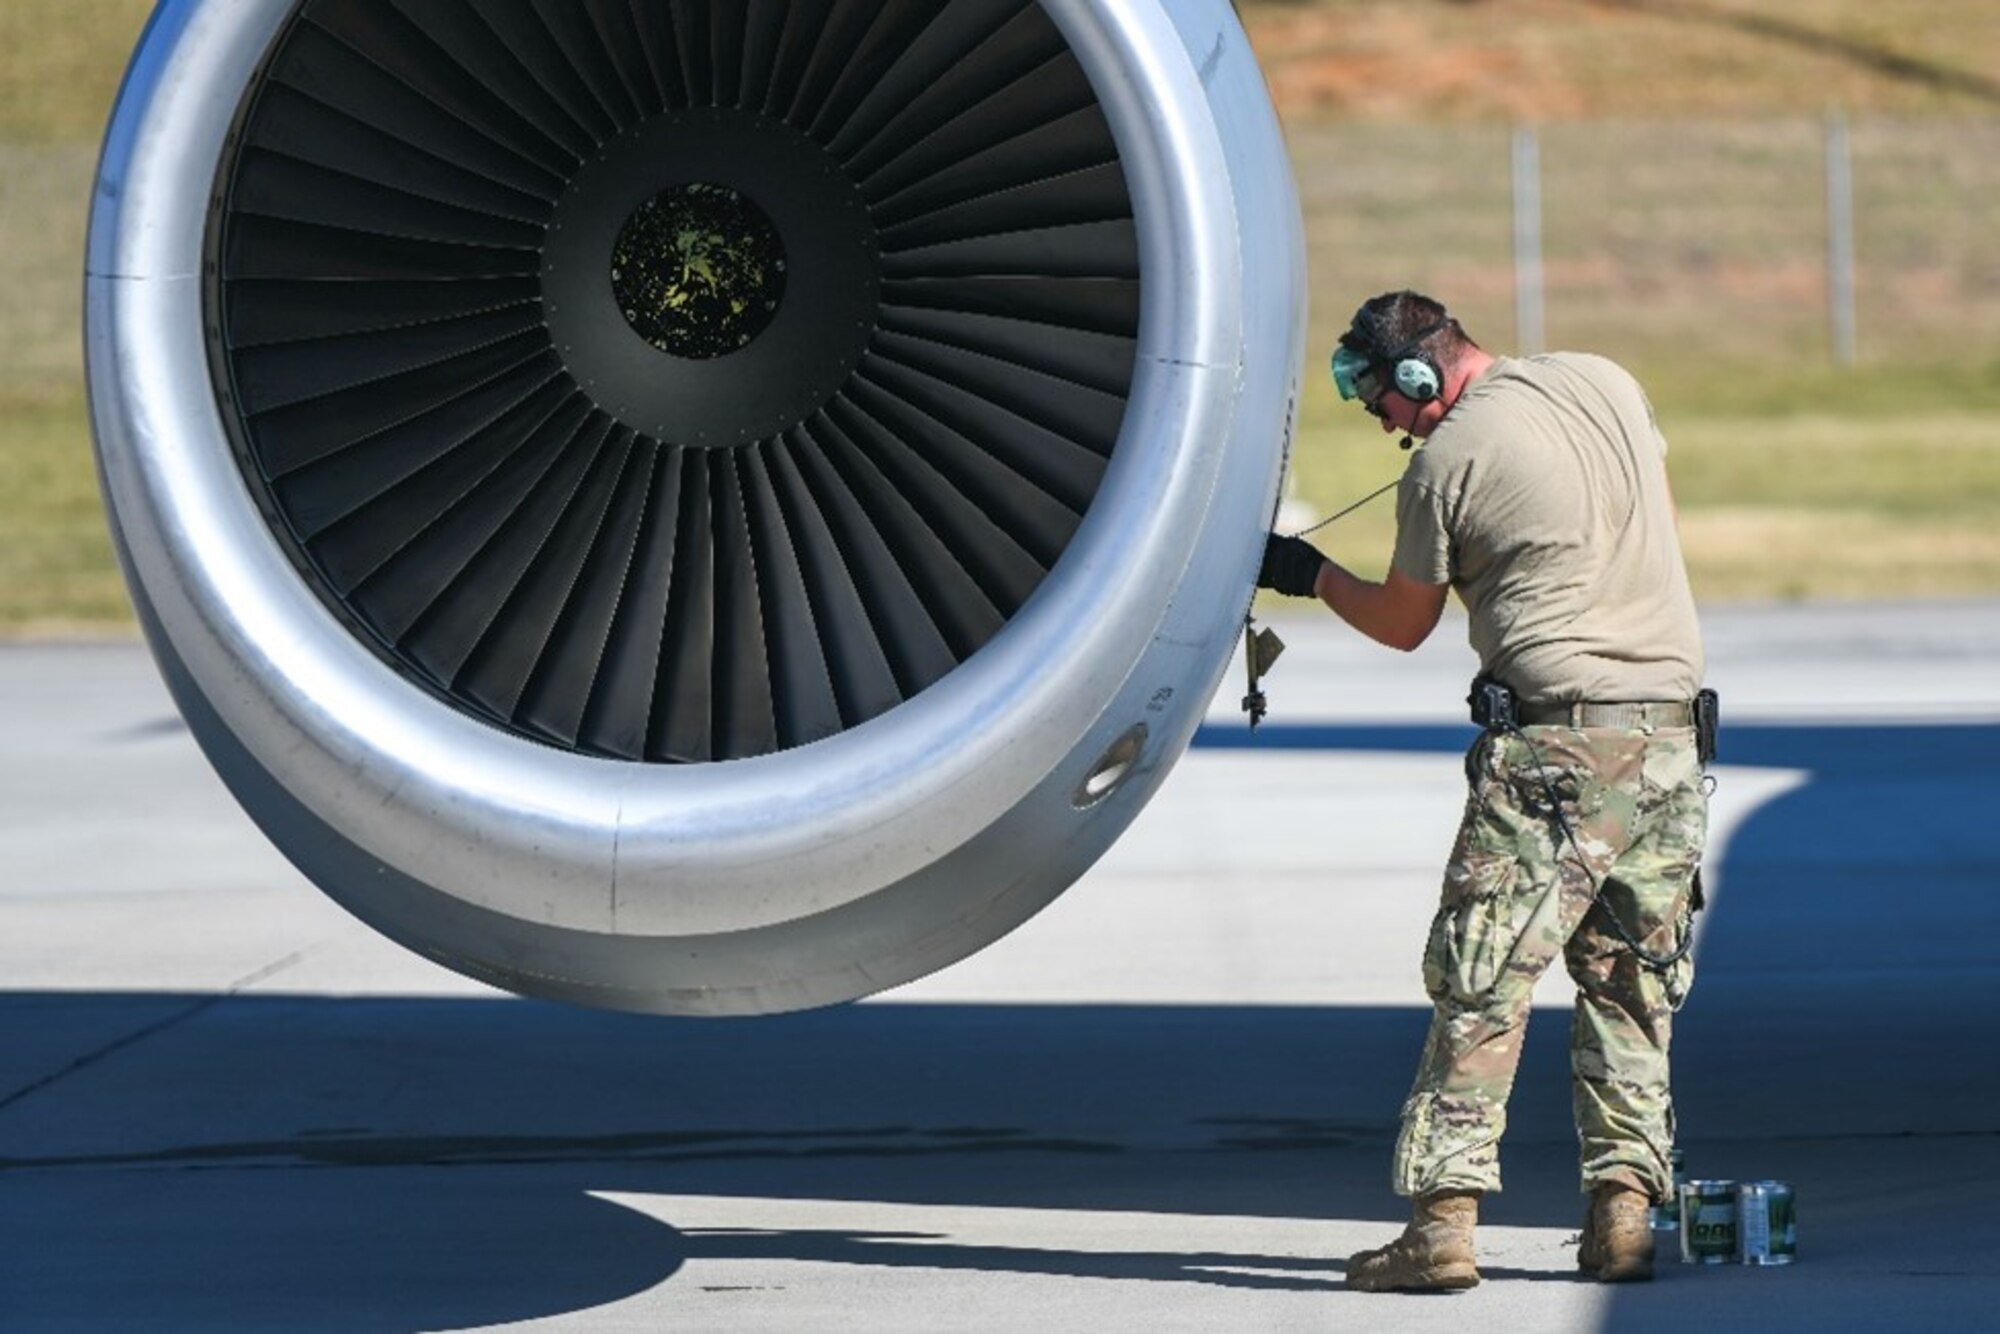 U.S. Air Force Airman from McGhee Tyson Air National Guard Base conduct hot-pit refueling during a 72-hour endurance mission for one of the KC-135 Stratotankers aircraft assigned to the 92nd Air Refueling Wing at McGhee Tyson Air National Guard Base, TN, Oct. 6, 2022. Each jet had two flying crew chiefs for support and utilized hot-pit crews at Fairchild AFB, McGhee Tyson ARB and March ARB. (U.S. Air Force photo by Airman 1st Class Jenna A. Bond)